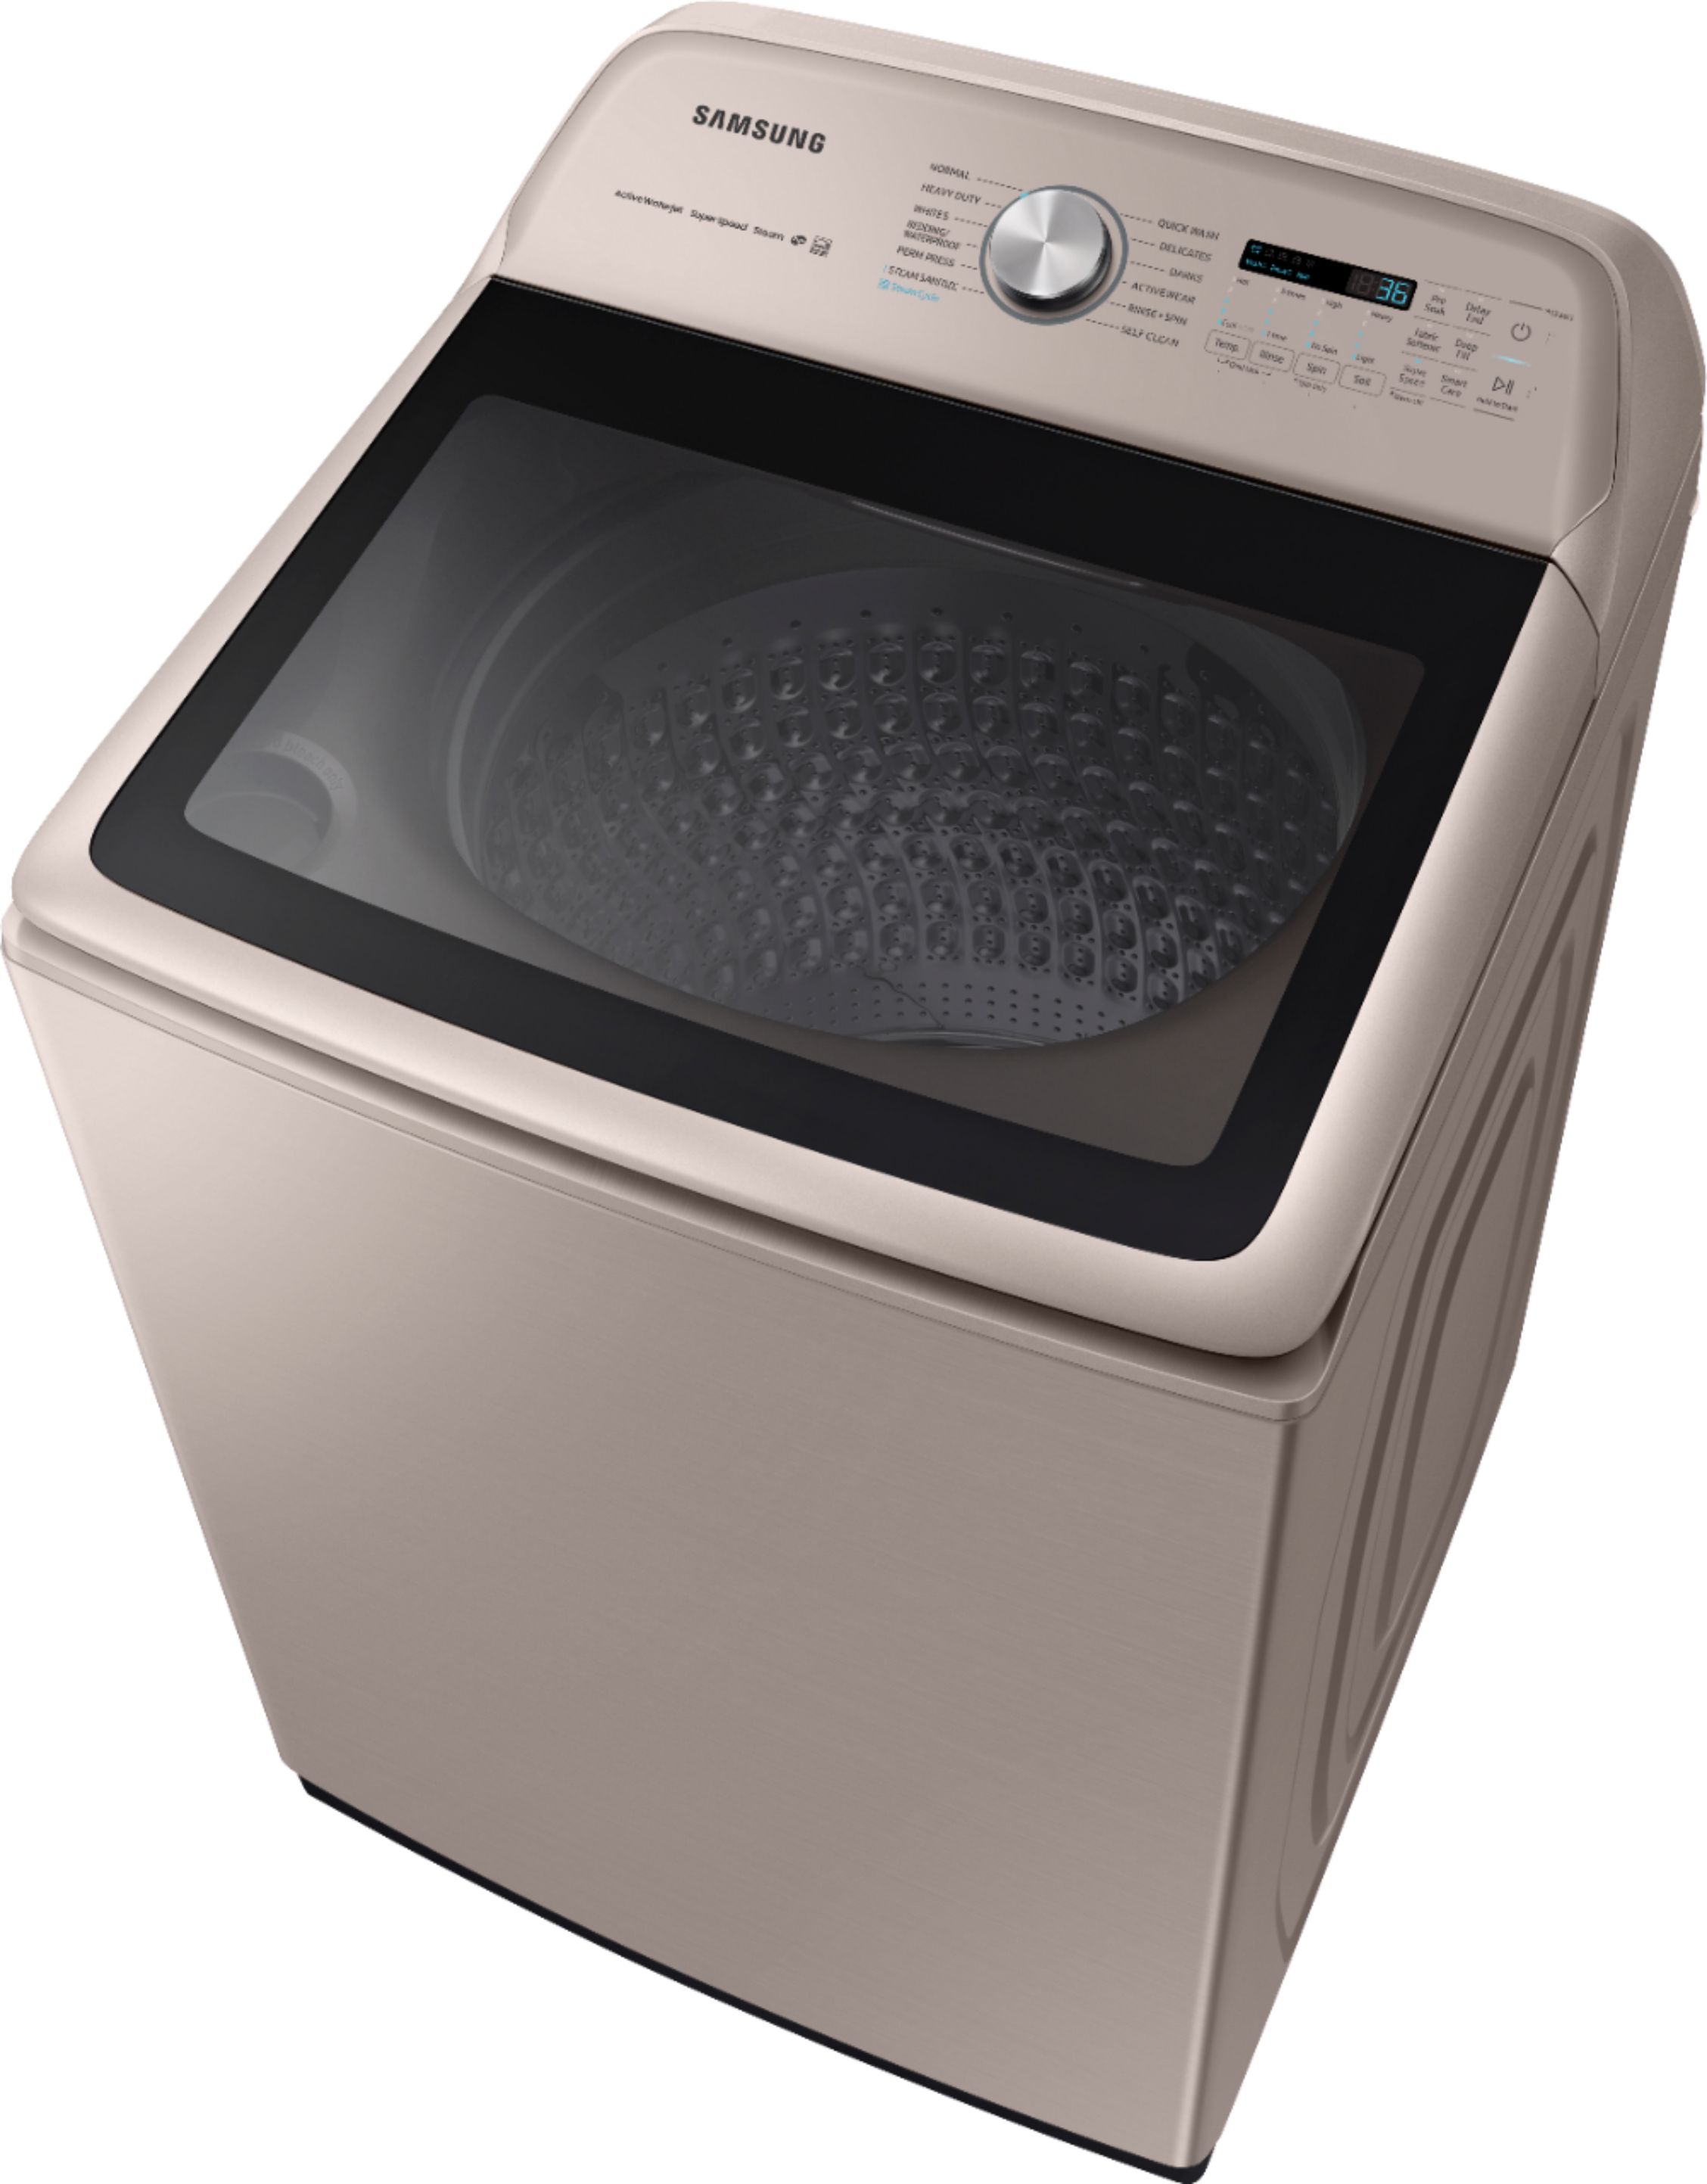 samsung-5-4-cu-ft-high-efficiency-top-load-washer-with-steam